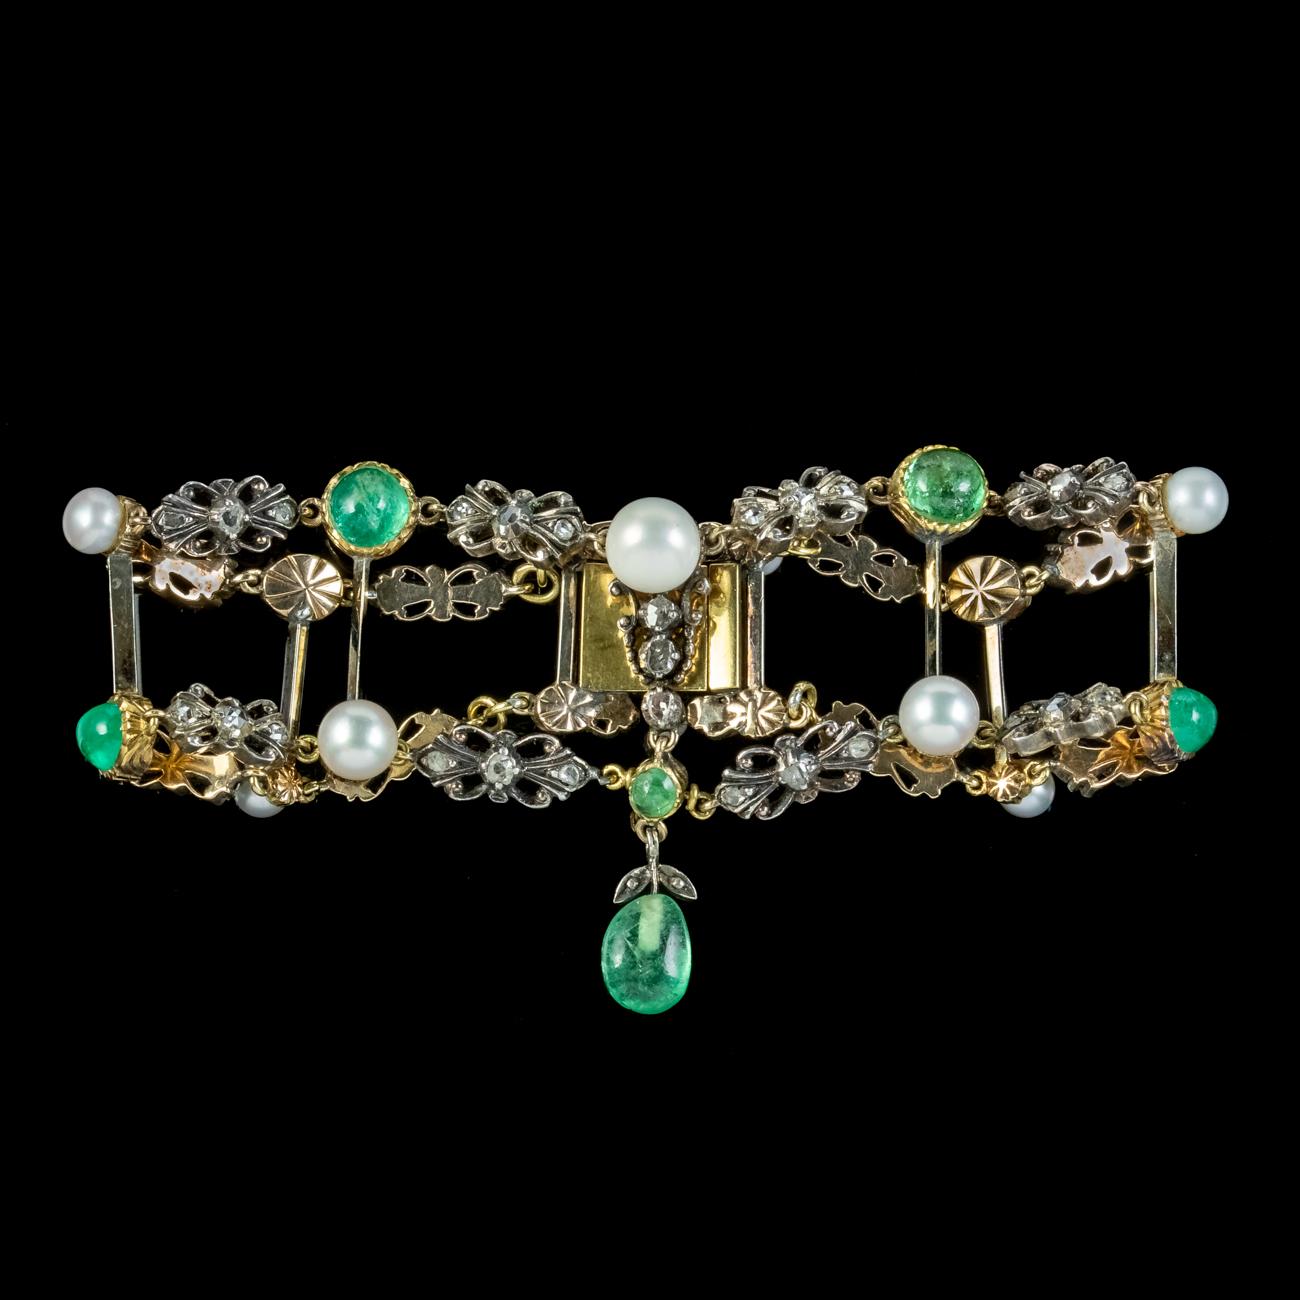 Antique Georgian Emerald Diamond Pearl Bracelet Silver 18ct Gold In Good Condition For Sale In Kendal, GB